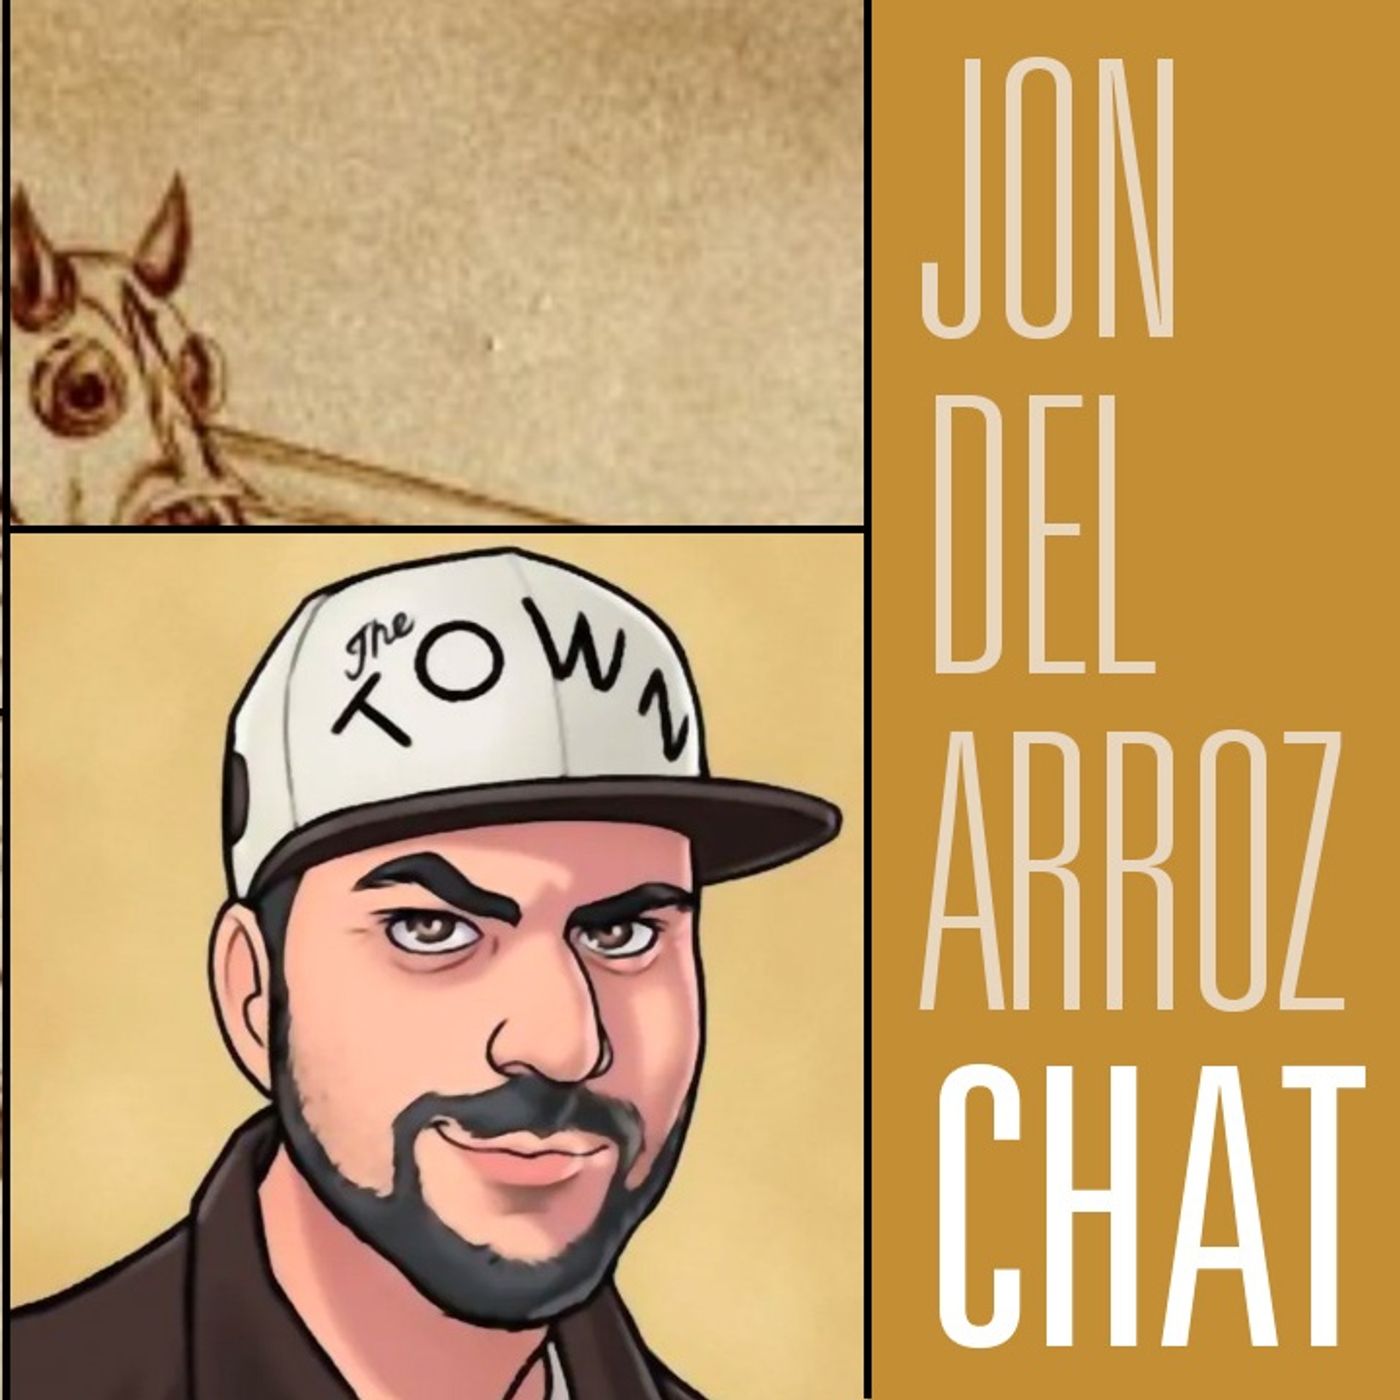 #ComicsGate Fights Back, Big Changes and Growth is Coming With Jon Del Arroz | Fireside Chat 212